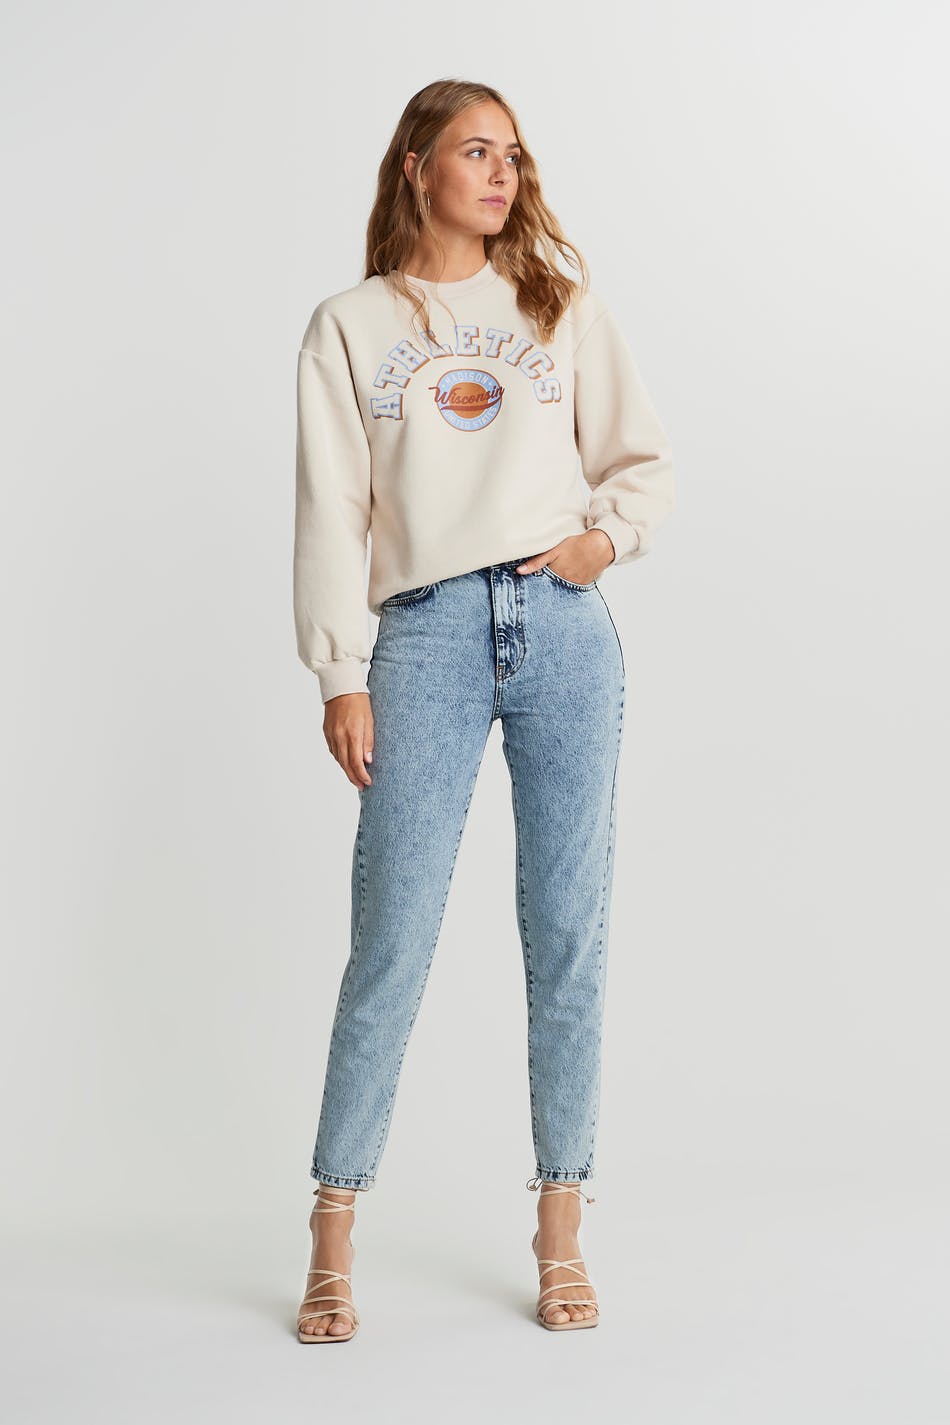 gina tricot mom jeans